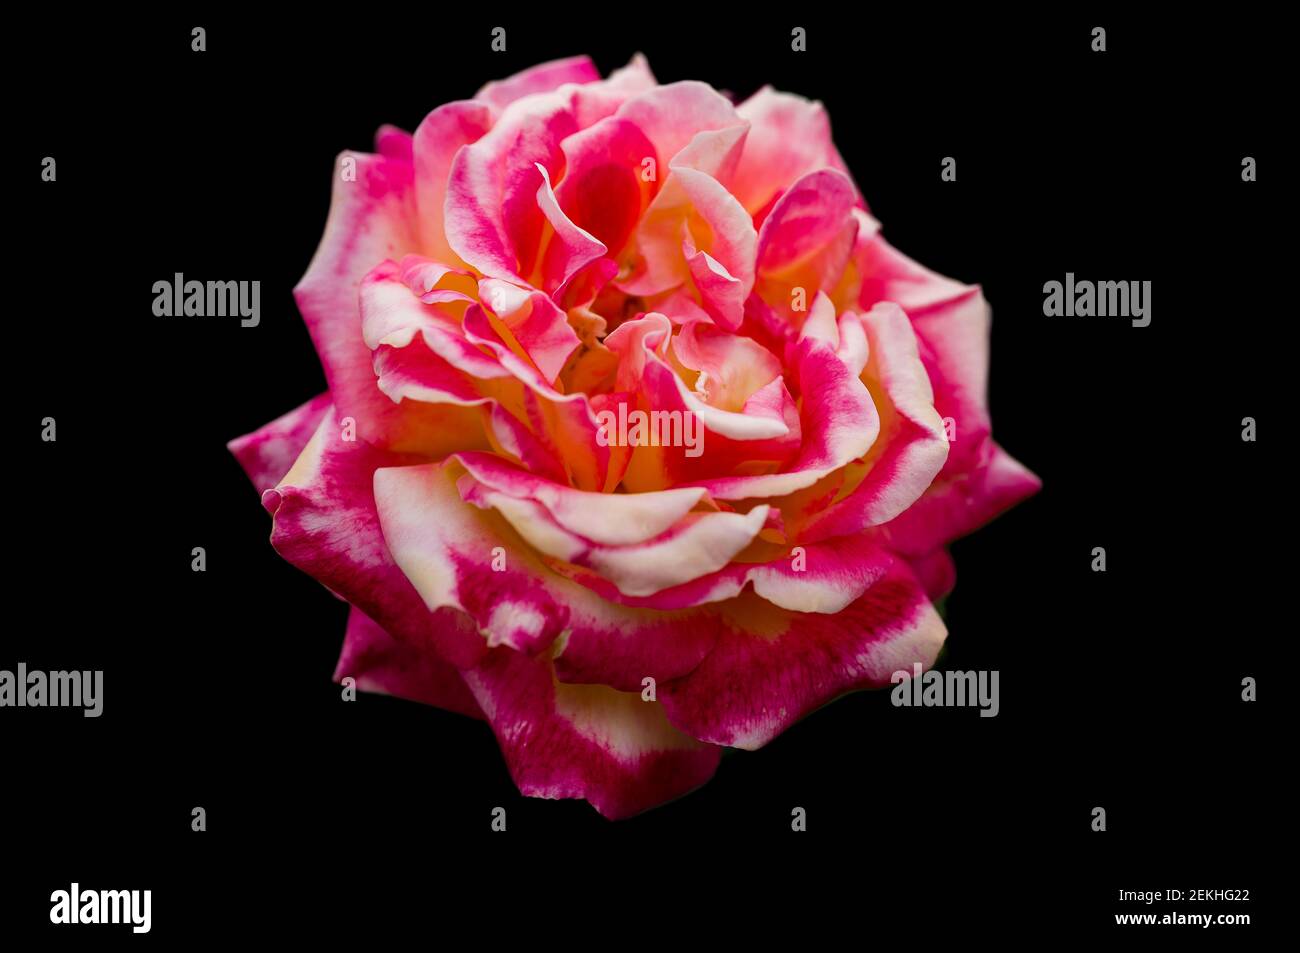 Pink and yellow rose flower head in black background Stock Photo